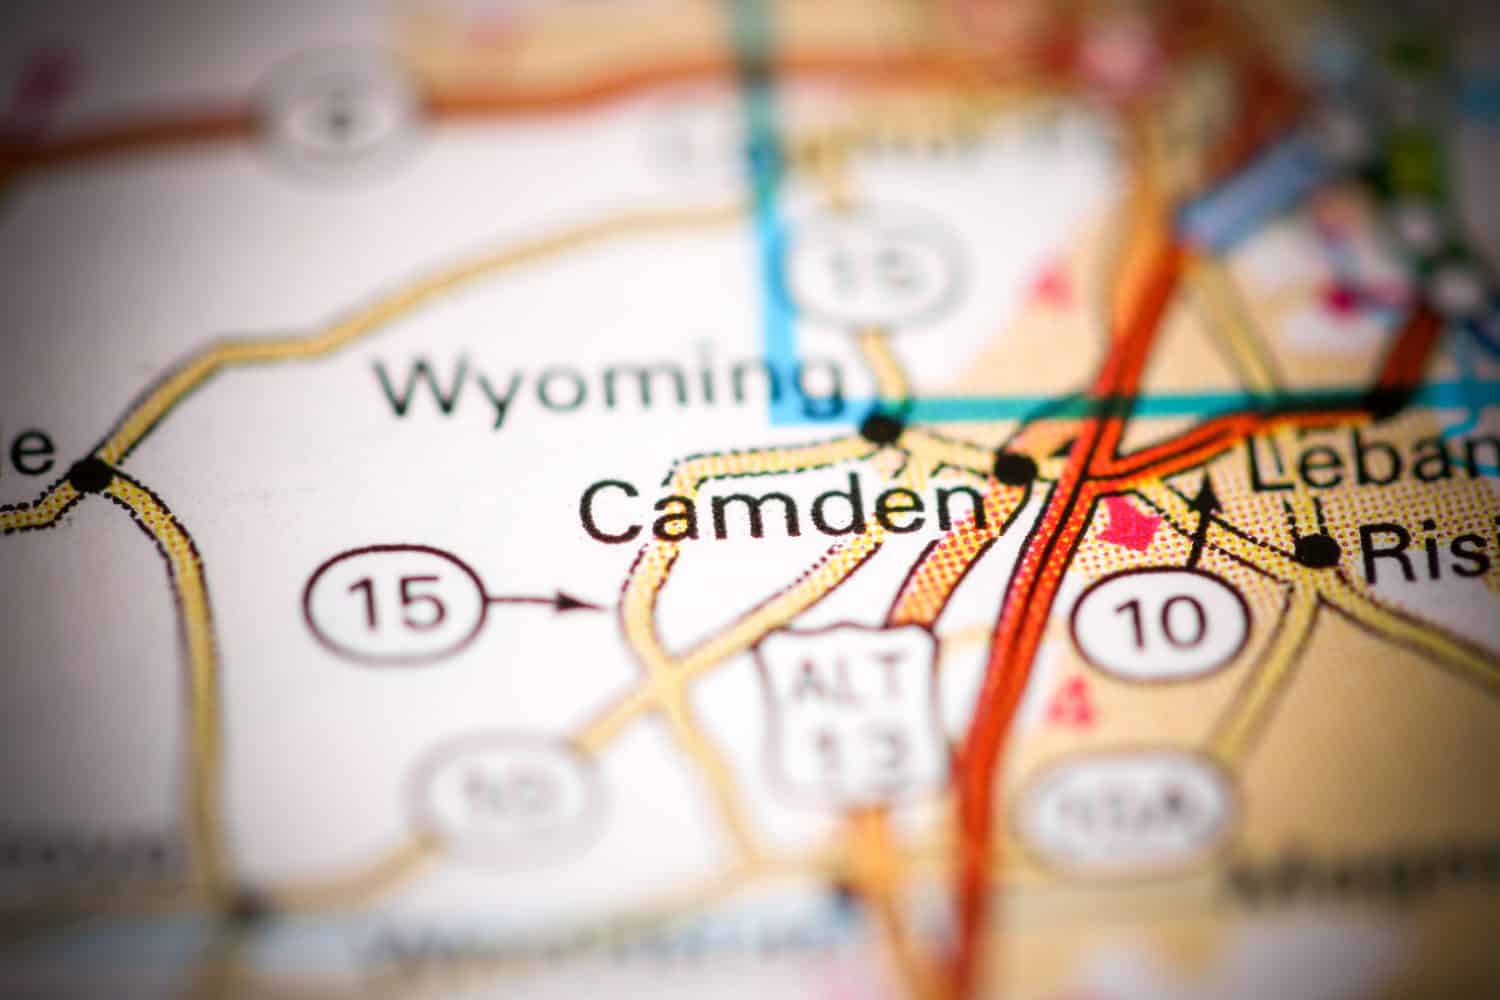 Camden. Delaware. USA on a geography map